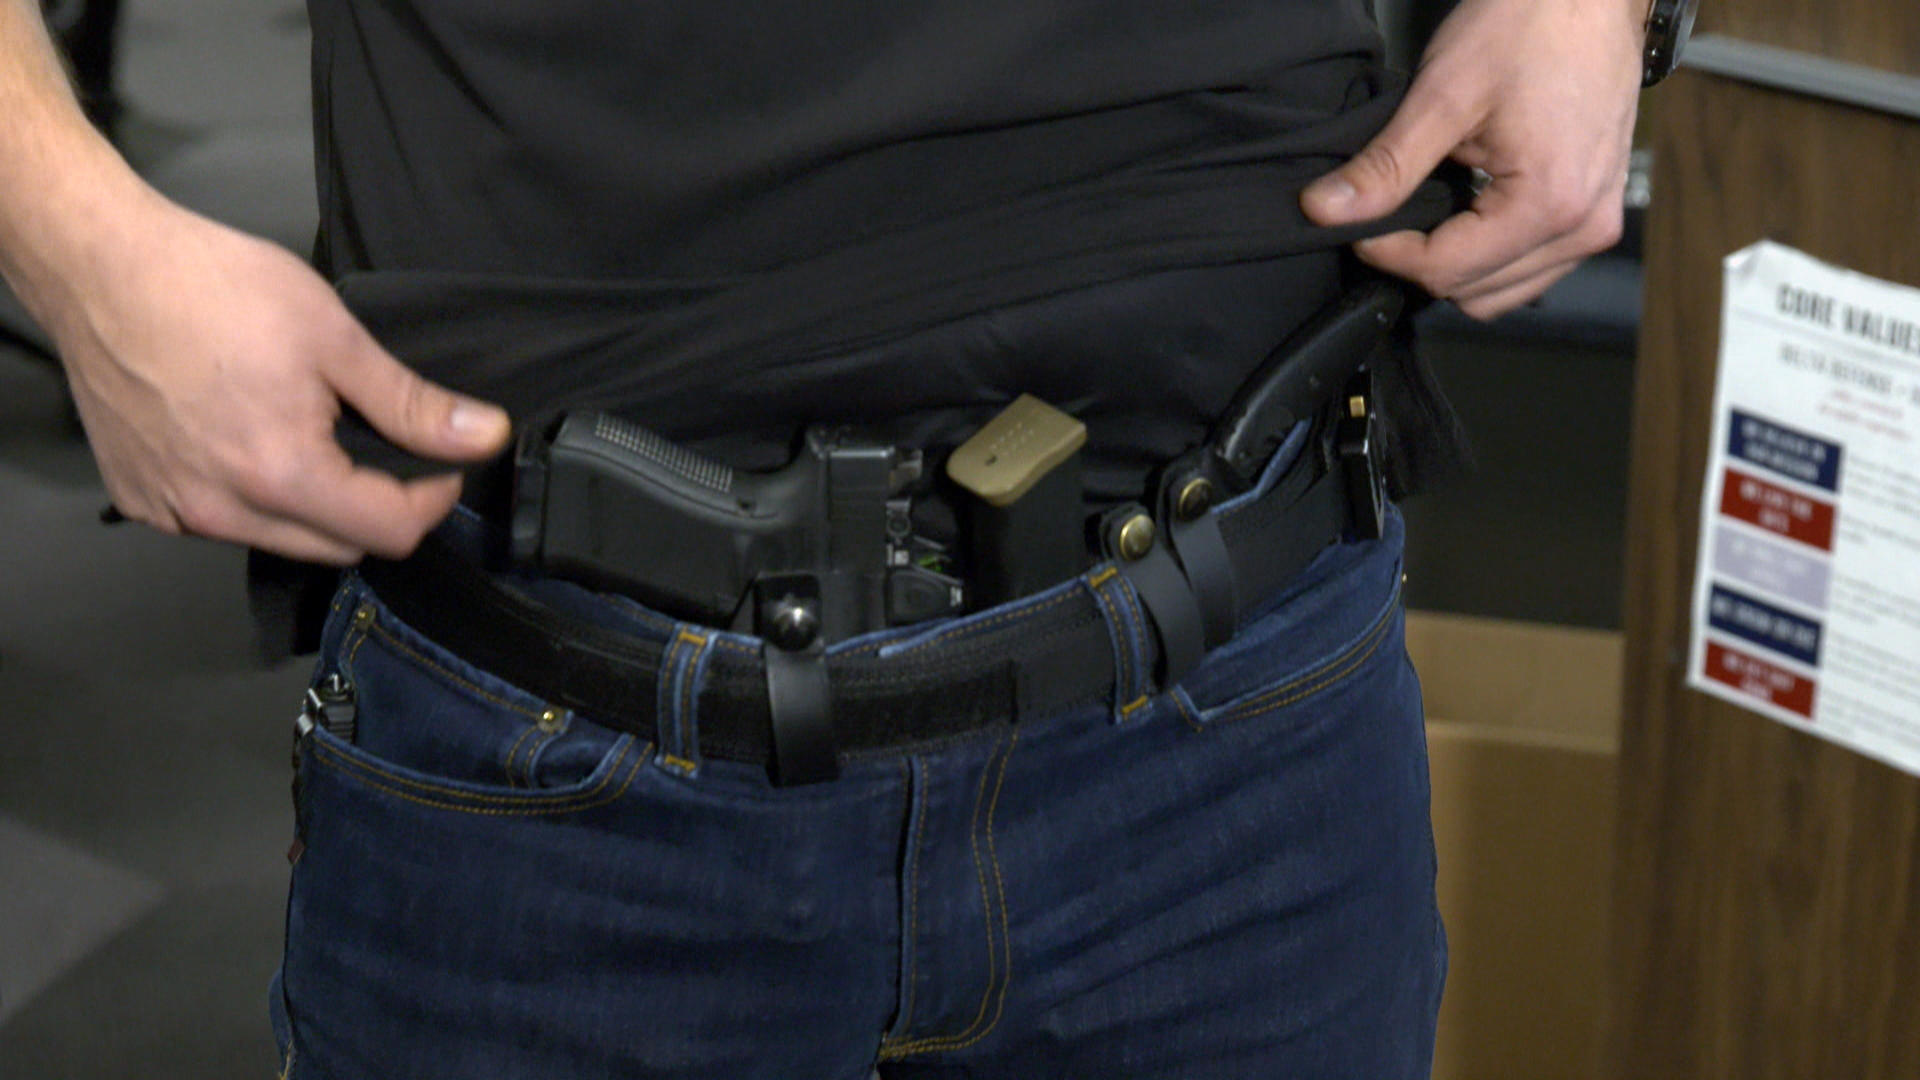 What everyone needs to know about Florida's new concealed carry